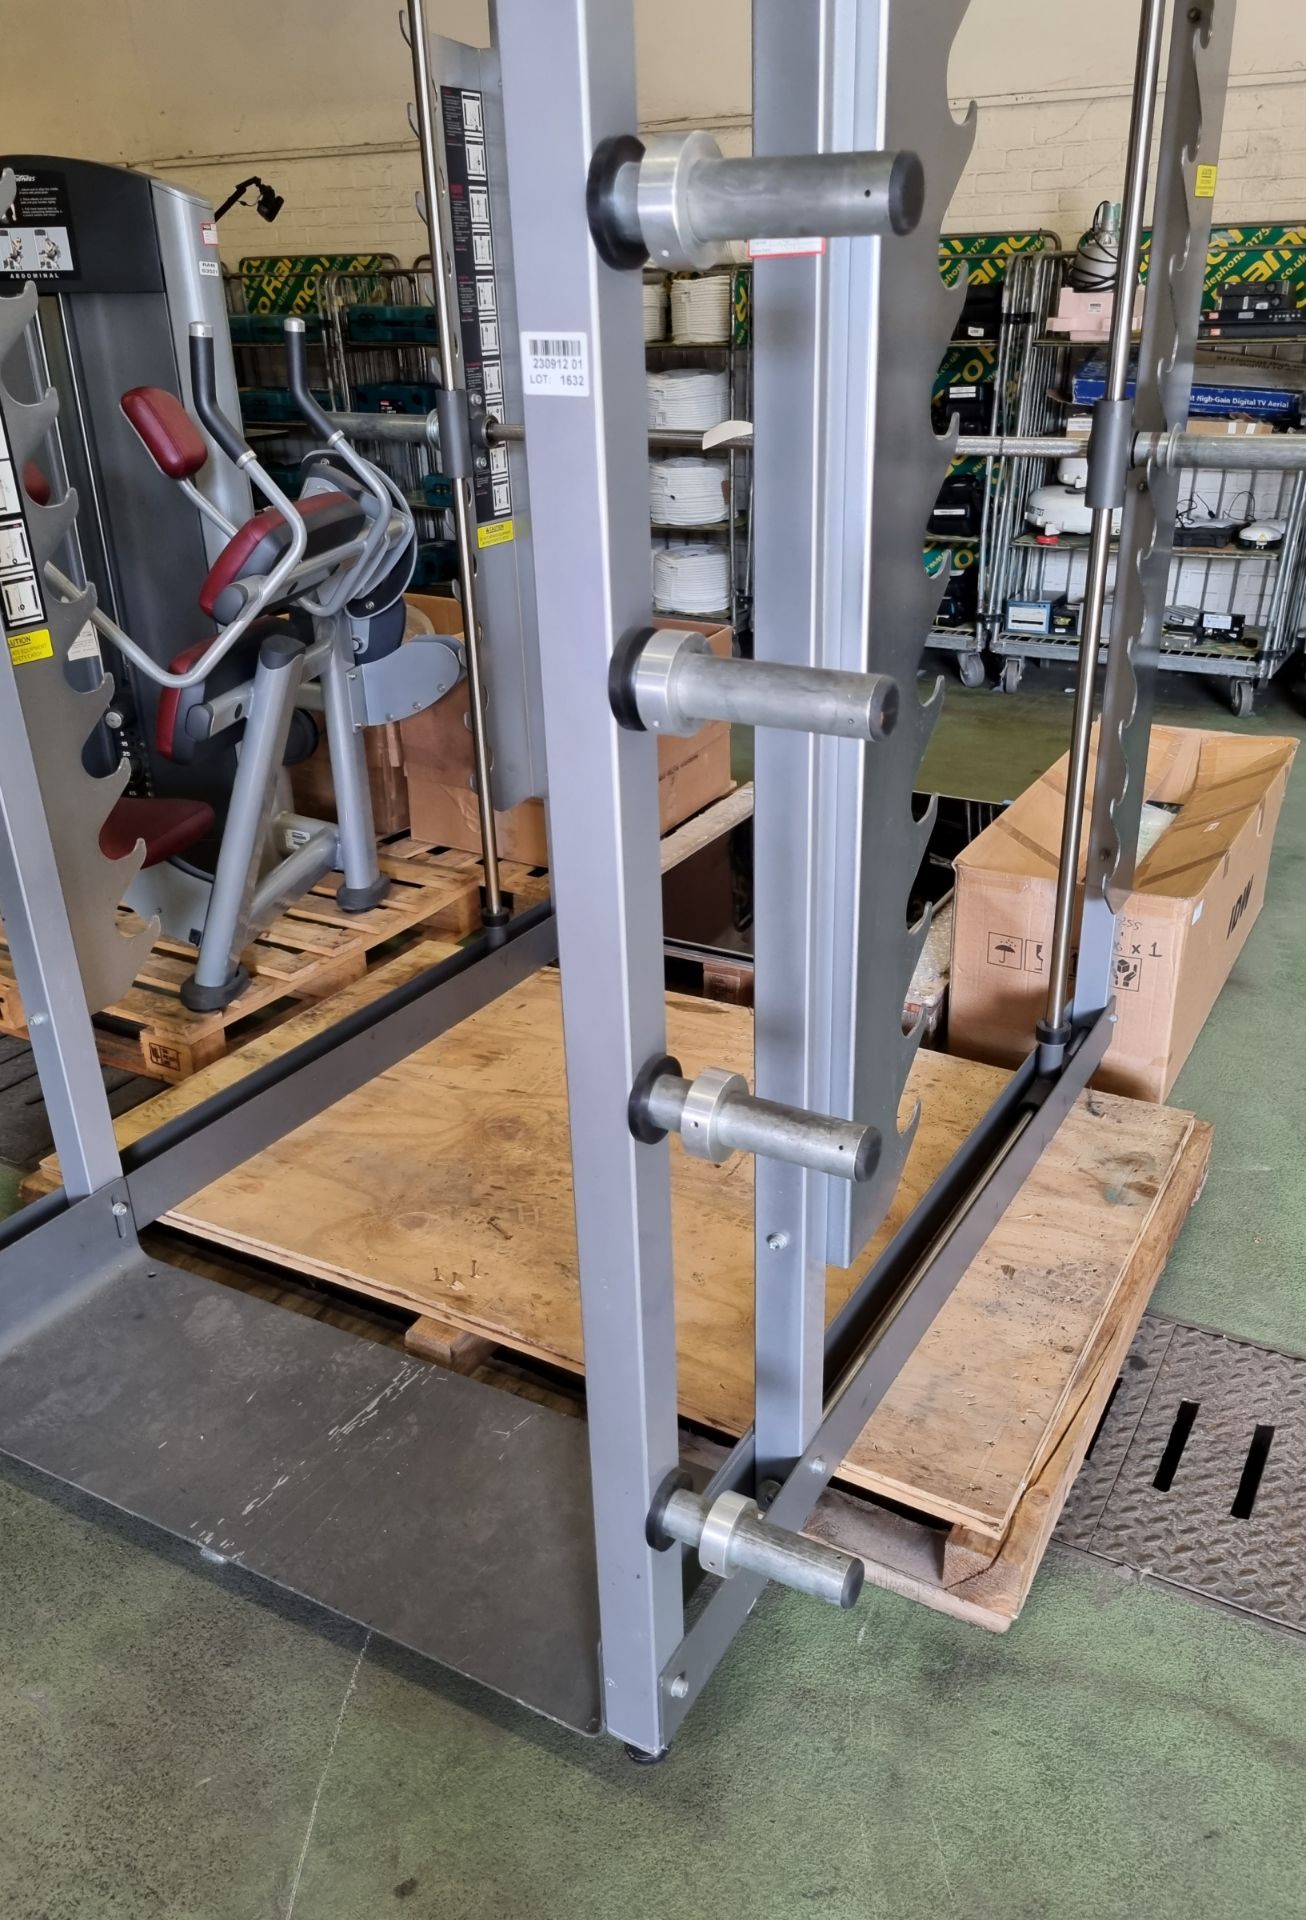 Star Trac Max Rack 3D multi - heavy weight training frame - W 1990 x D 1760 x H 2160 mm - Image 7 of 7